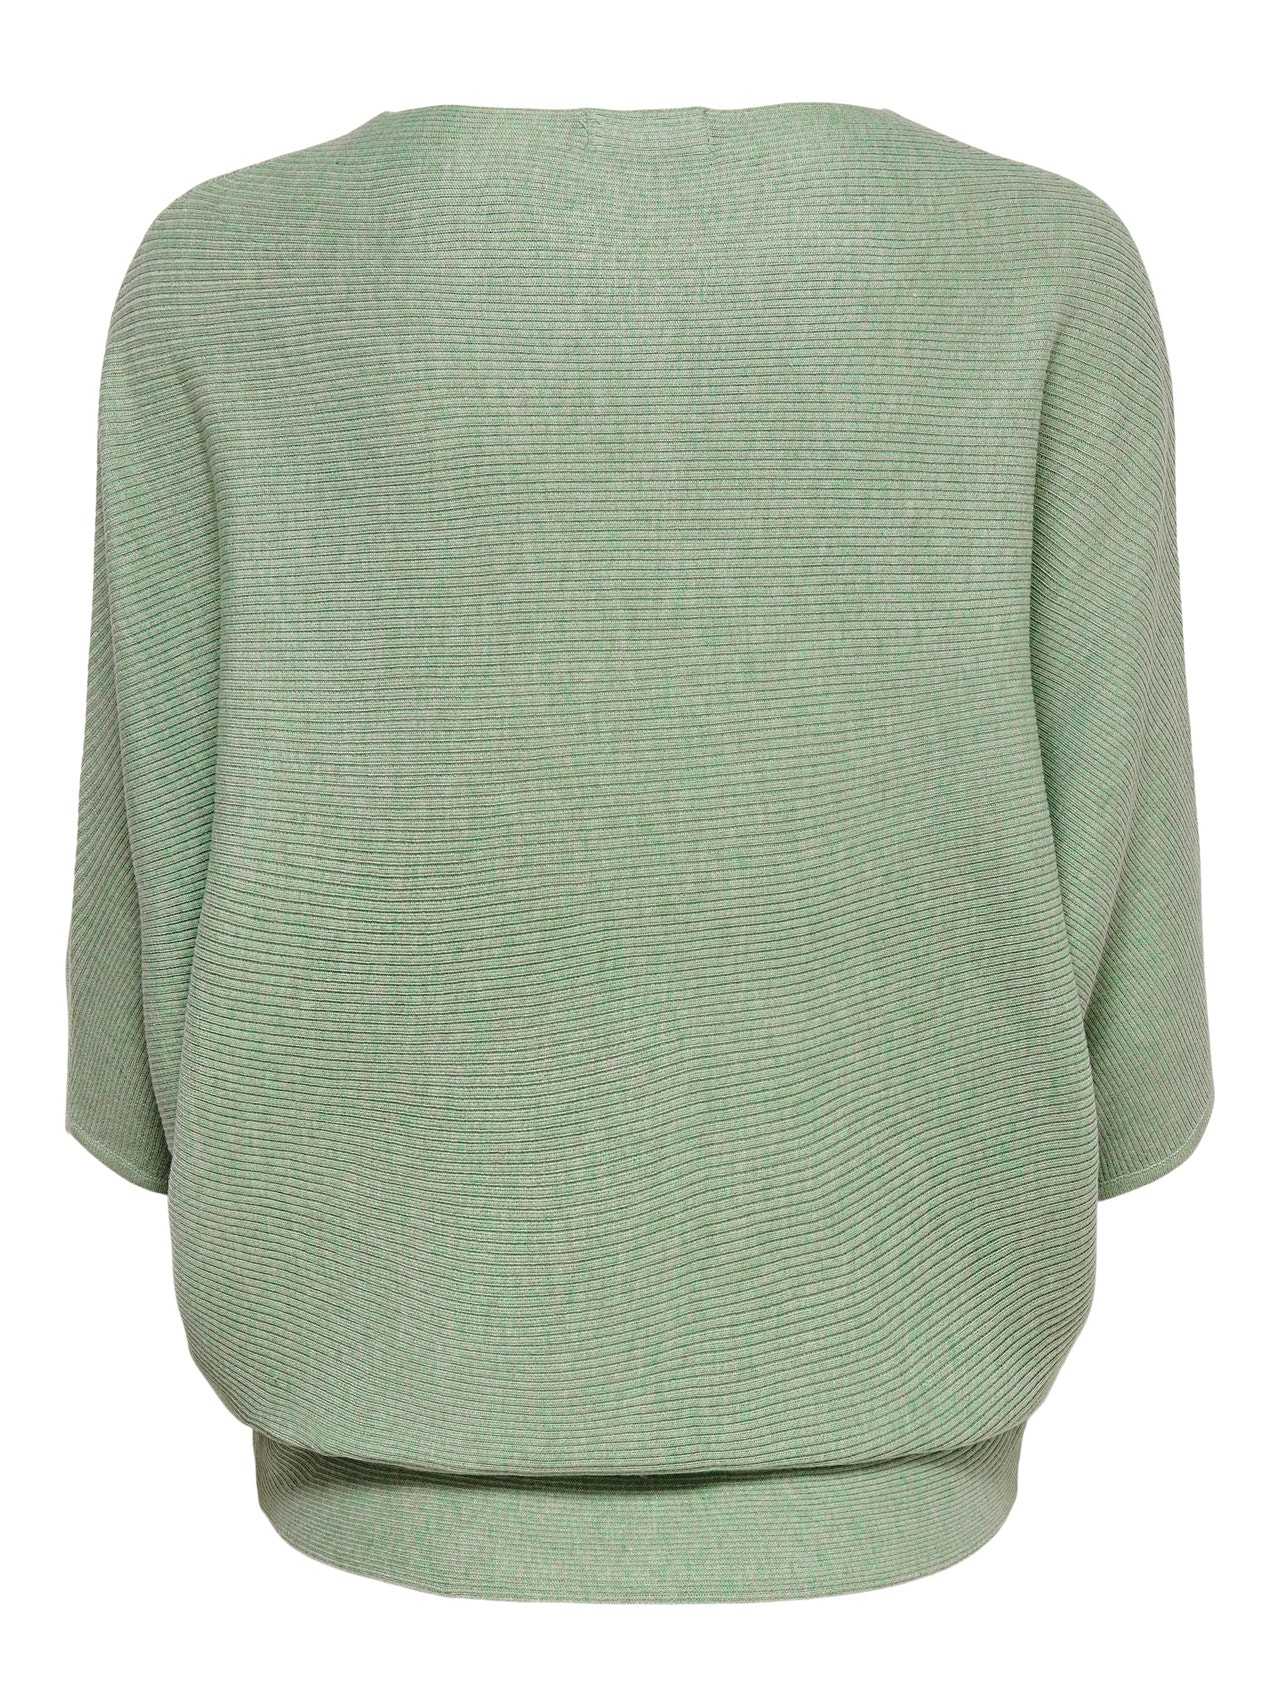 ONLY Boat neck Pullover -Basil - 15257849